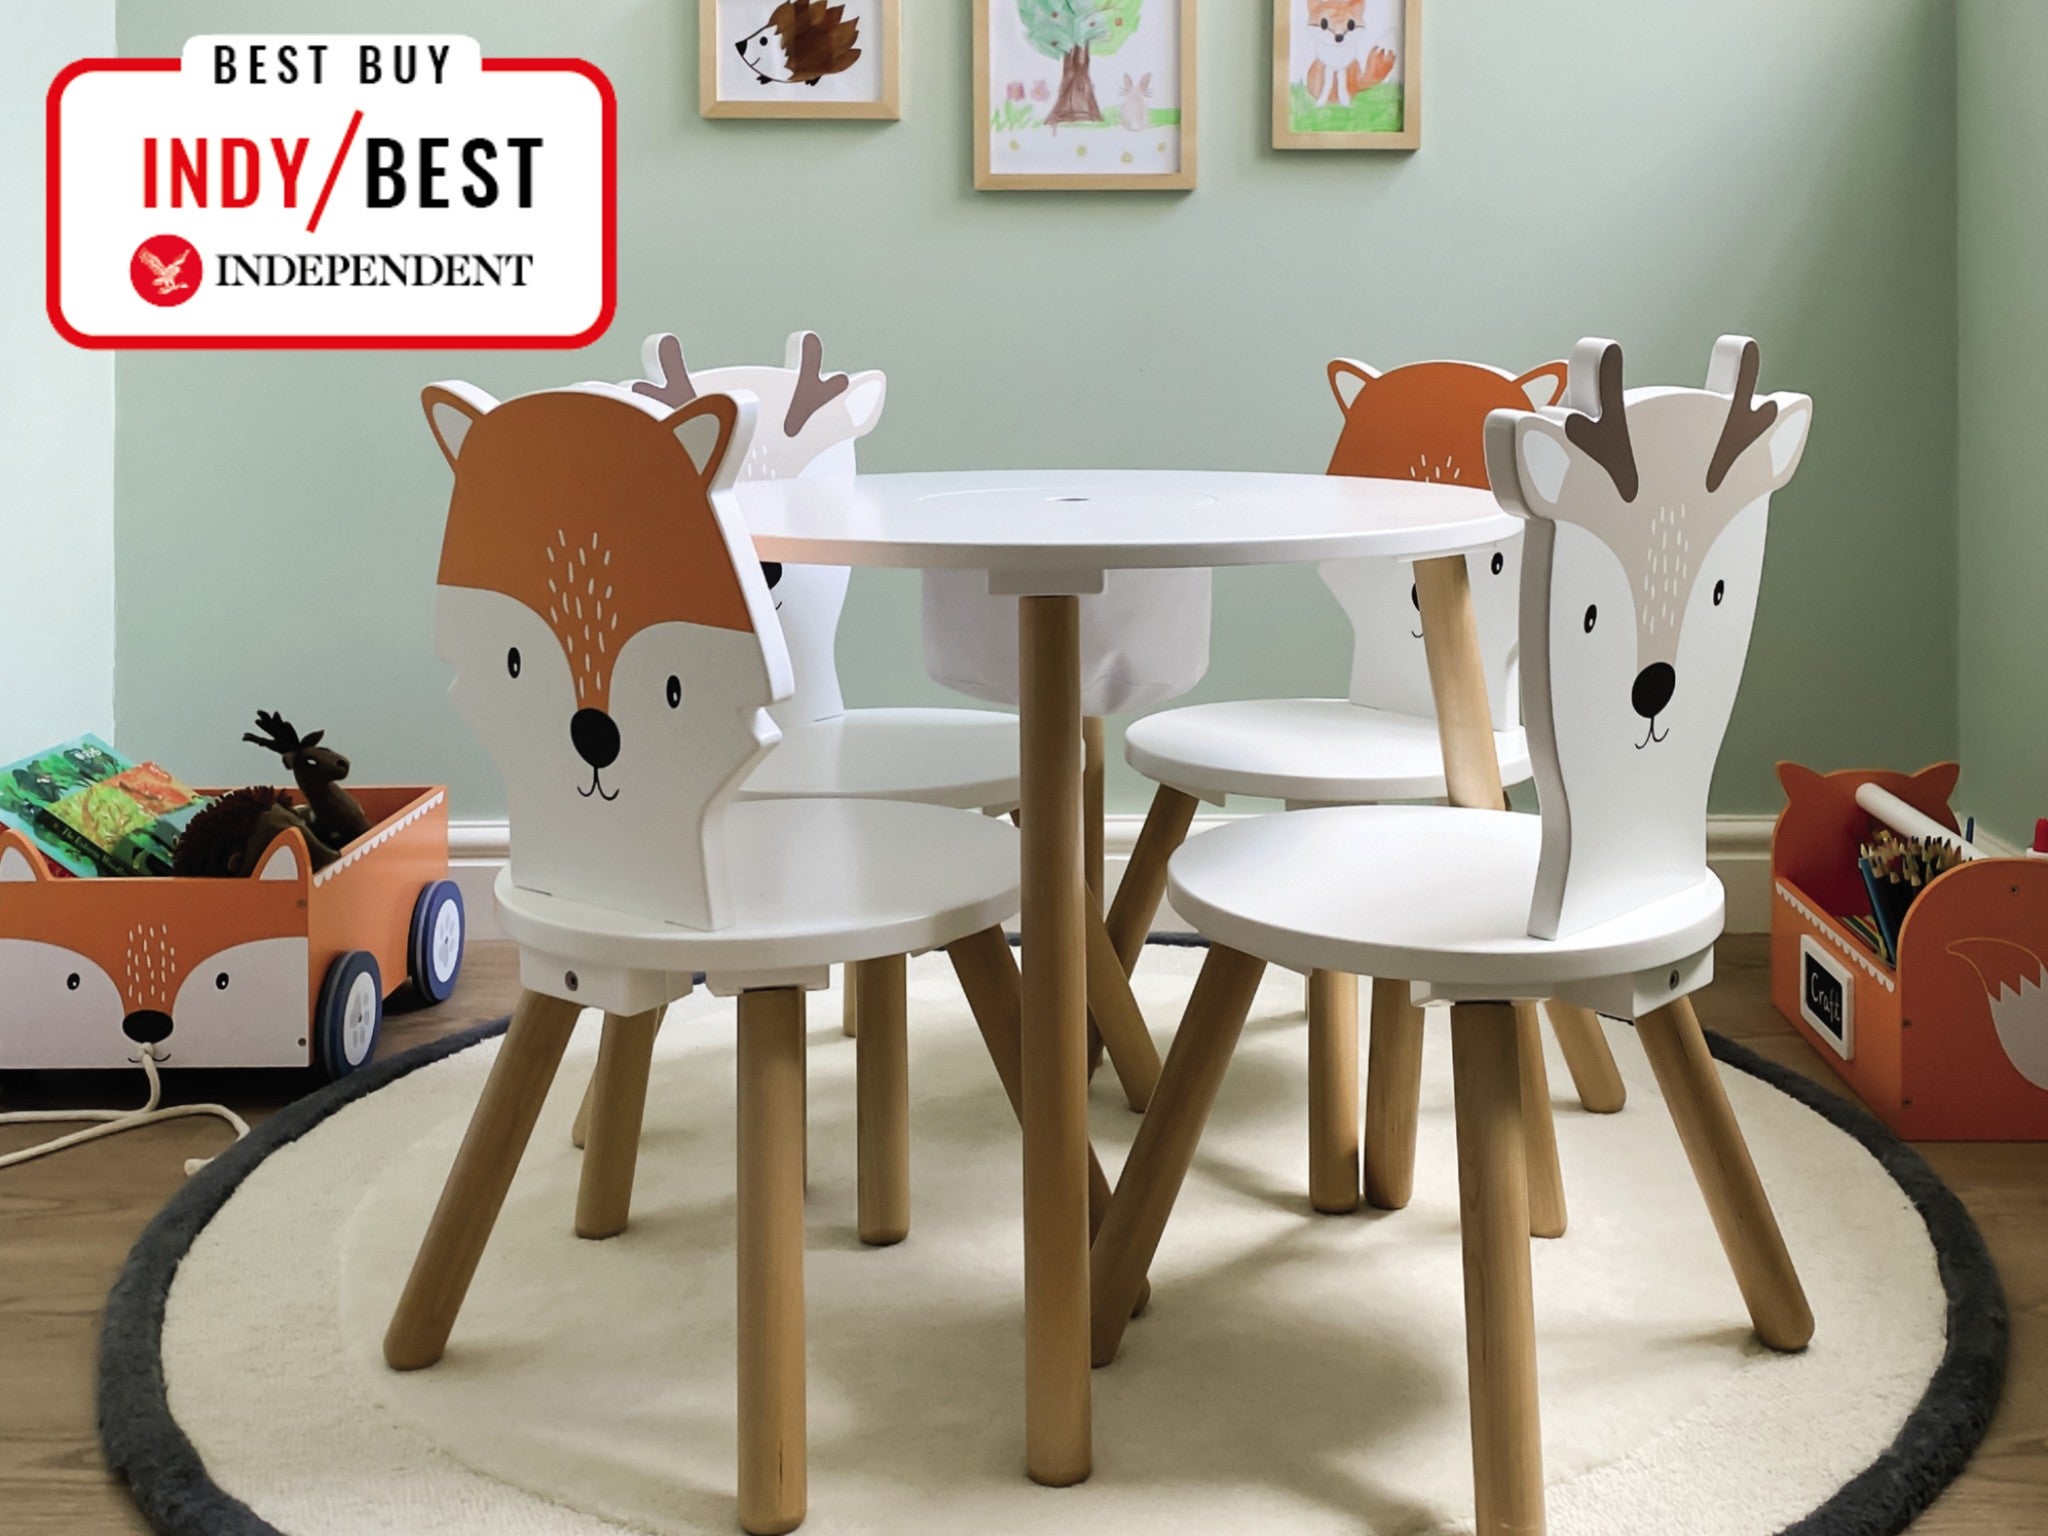 Svan Play with Me Toddler Table Set with 3 Chairs and Stool Natural 100% Wood Kids Table and Chair Set 